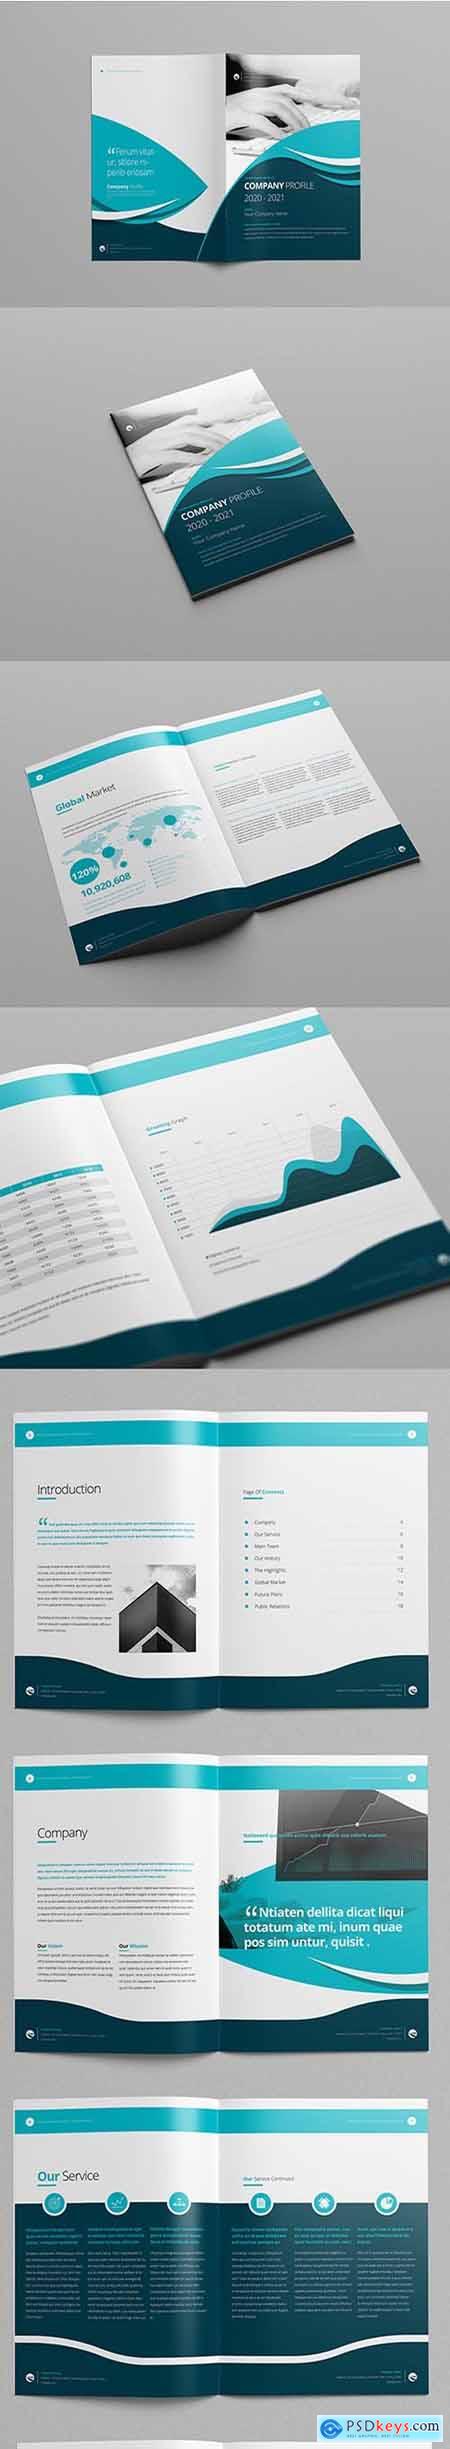 Company Profile Layout with Teal and Blue Accents 220149458